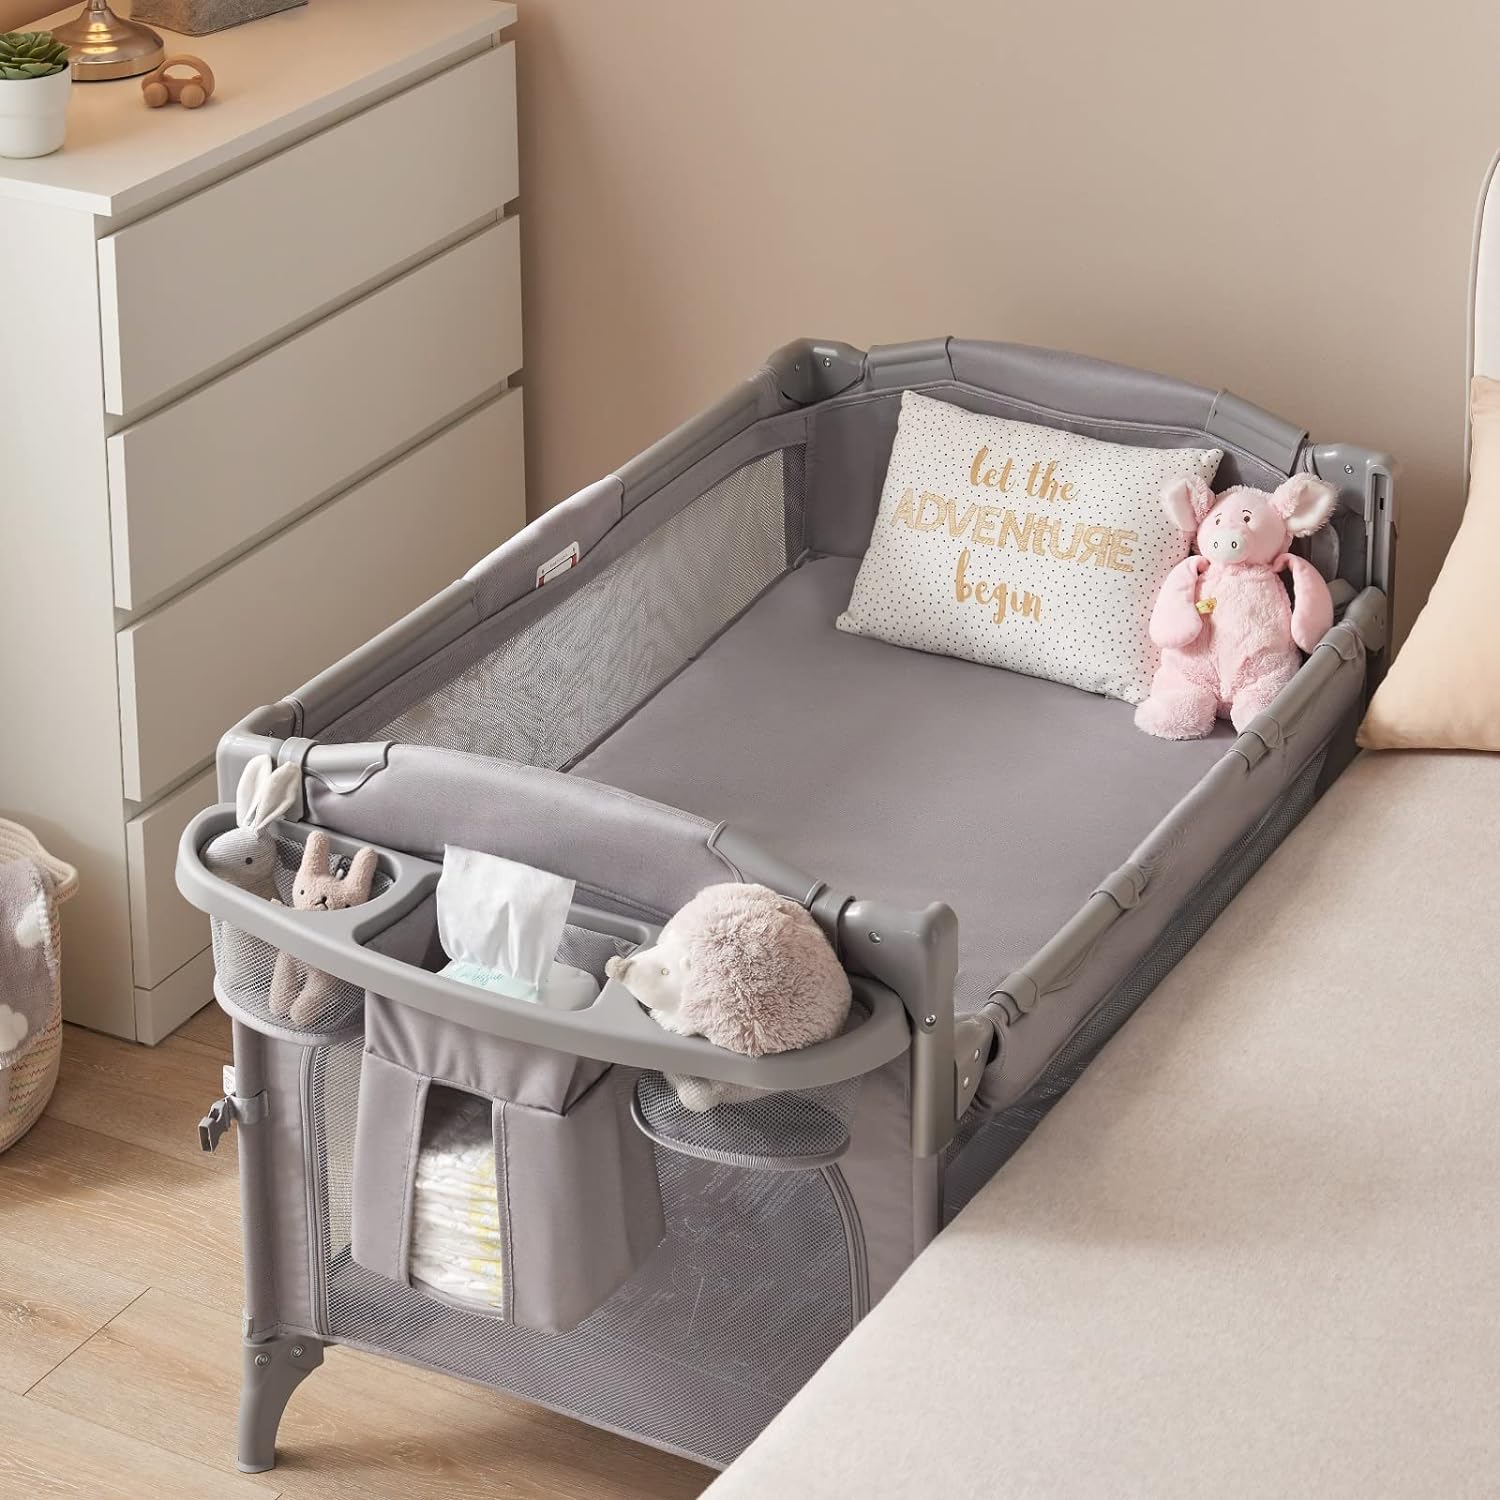 Limited-Time Specials! BEKA Baby 4 in 1 Bedside Sleeper - Grab Yours Before It's Gone!